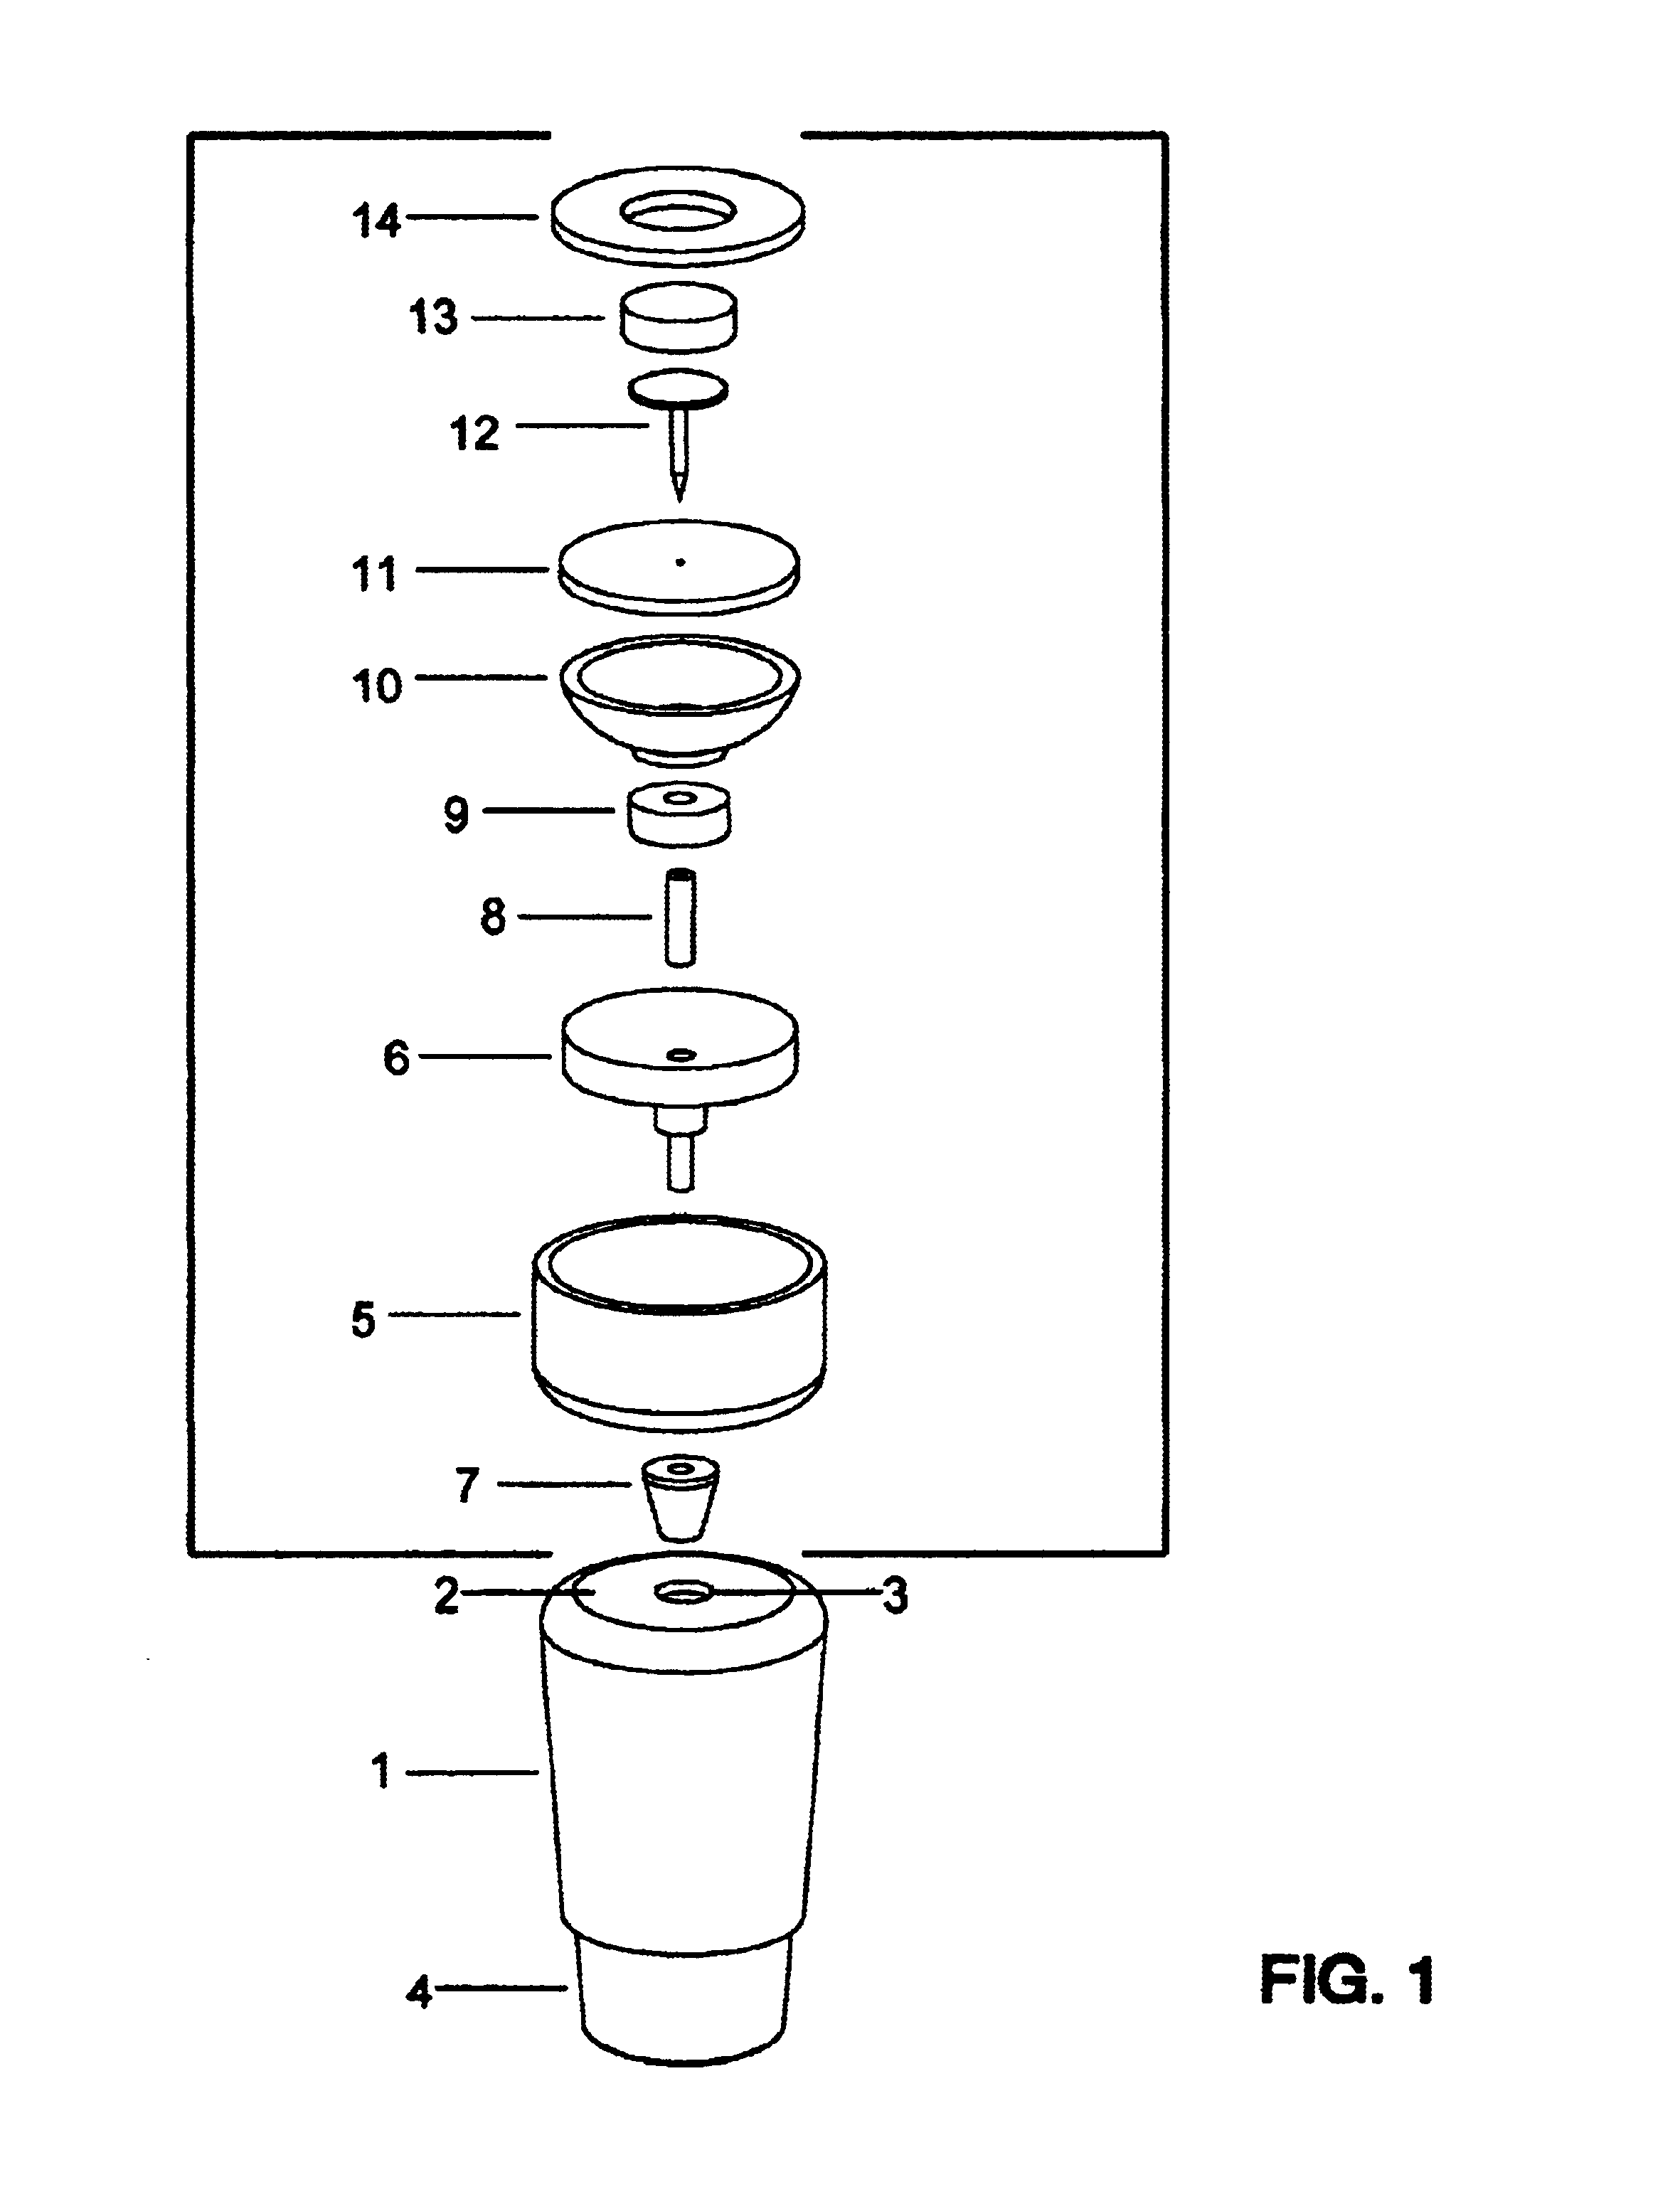 Device for use with a golf club to pick up objects